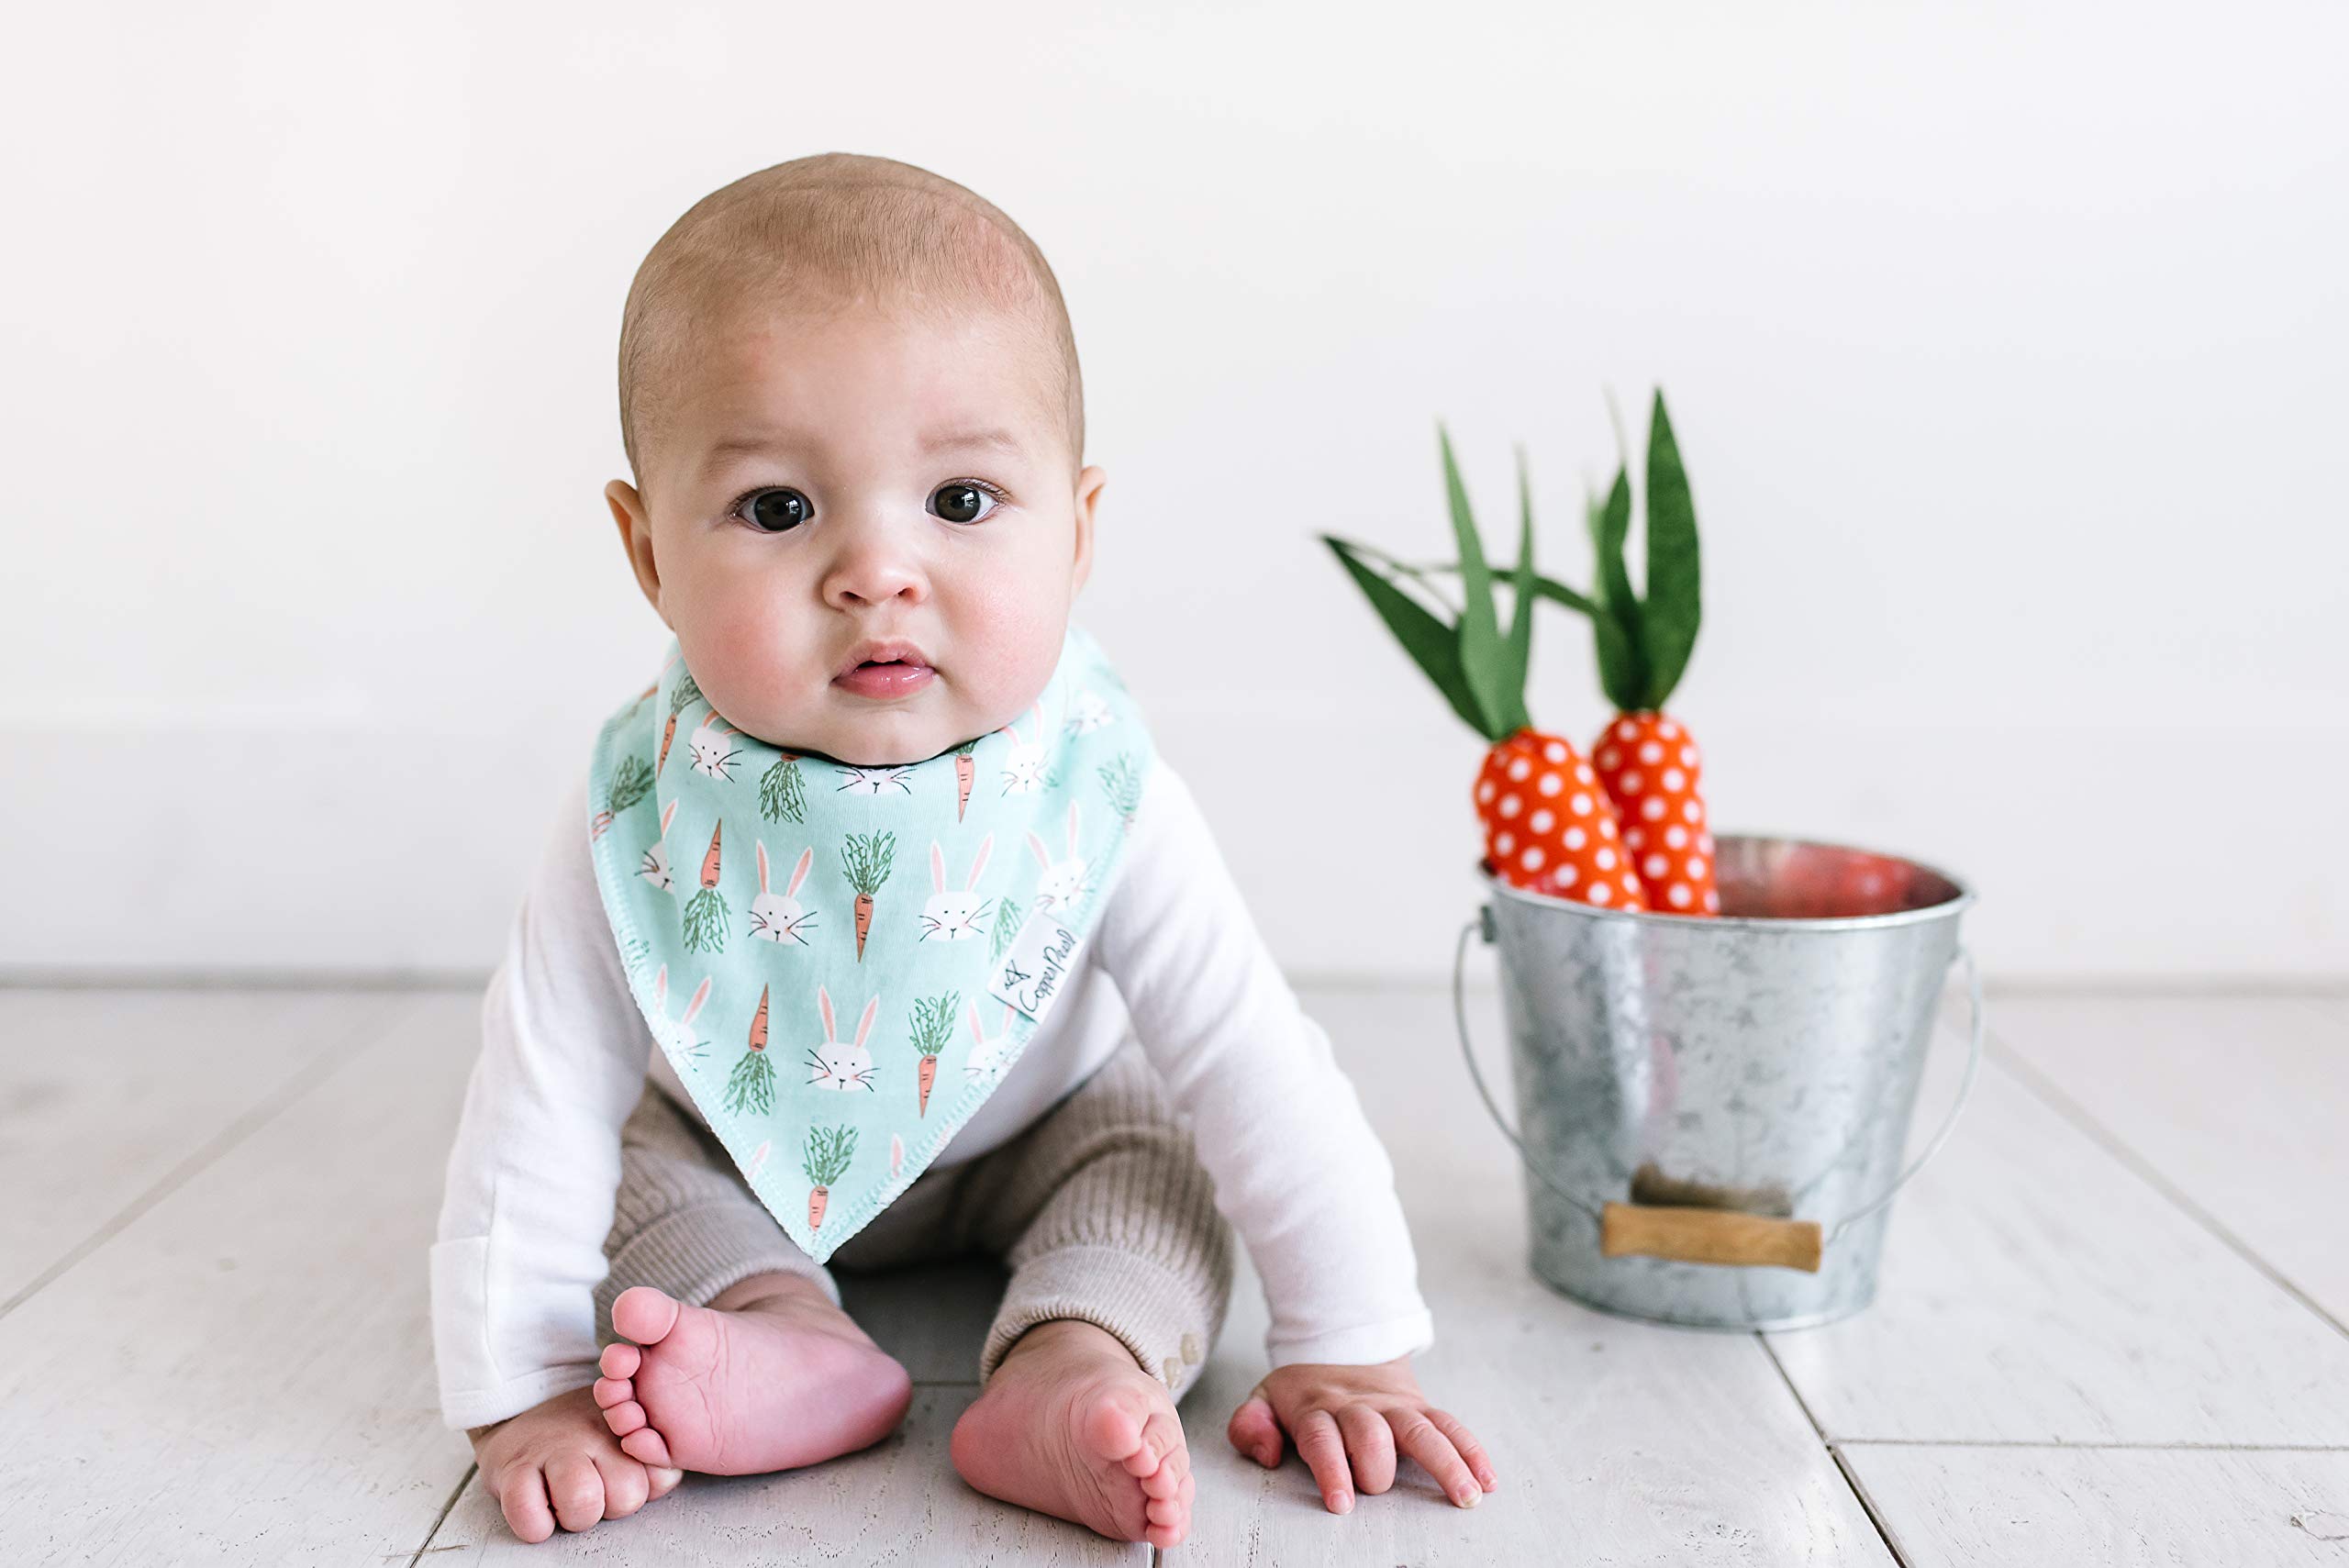 Copper Pearl Baby Bandana Drool Bibs for Drooling and Teething 4 Pack Gift Set “Holiday